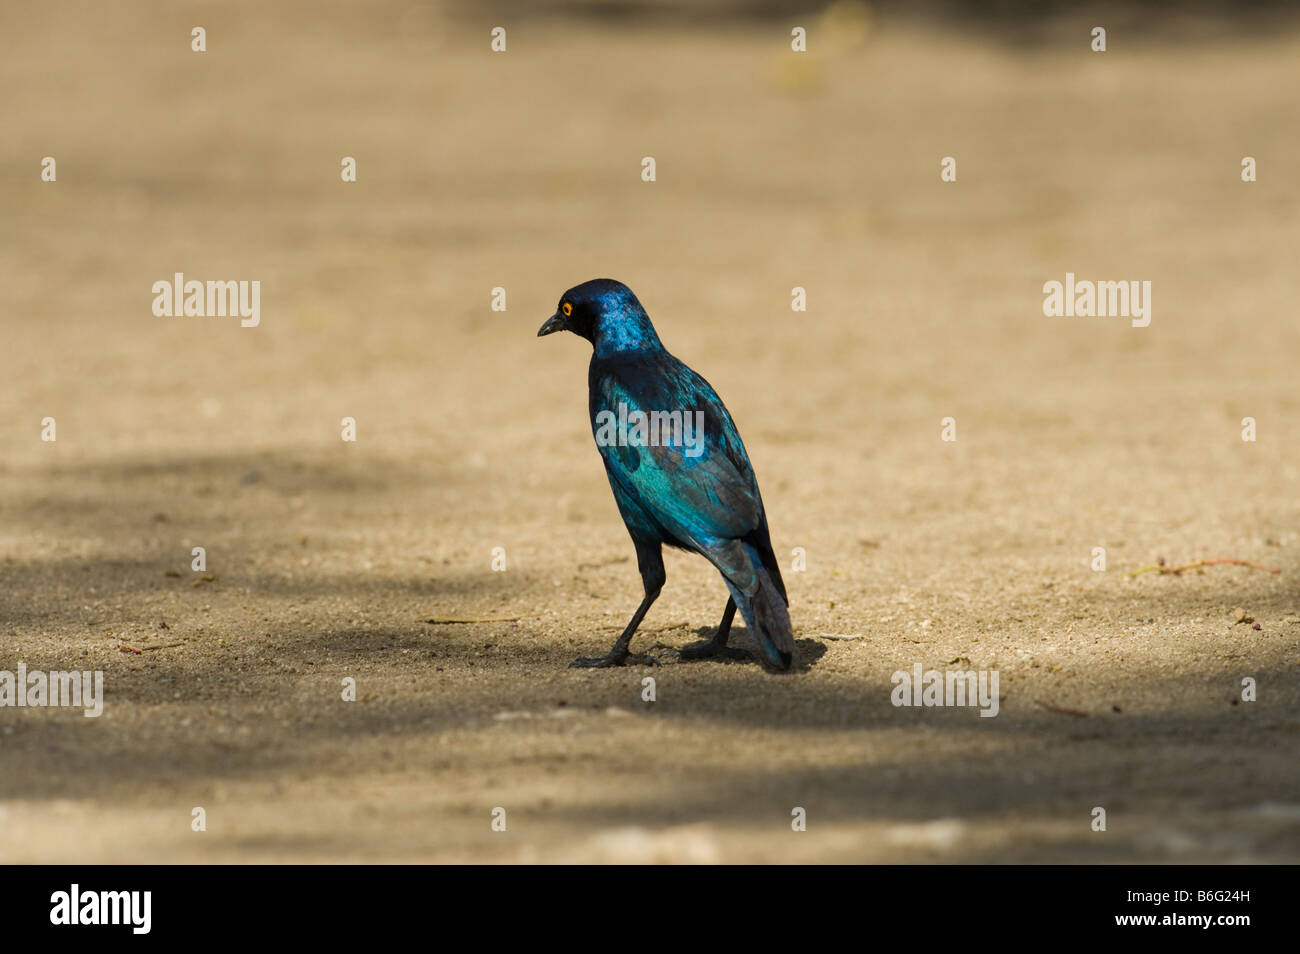 Southern GLOSSY STARLING Lamprotornis chalybaeus walking on ground  south-Afrika south africa Bird southern Africa reverine fore Stock Photo